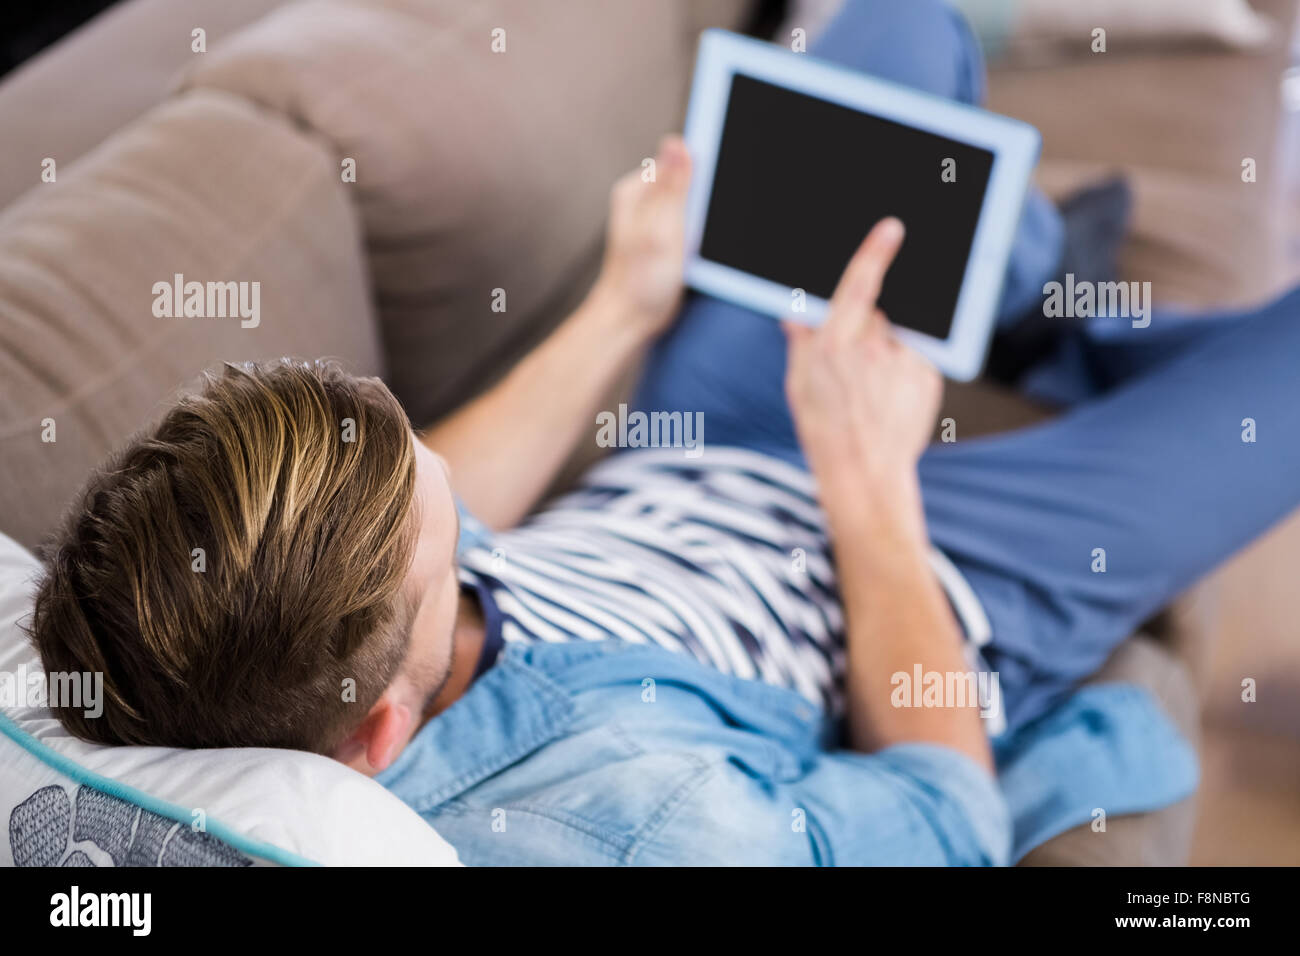 Casual man using tablet on sofa Banque D'Images